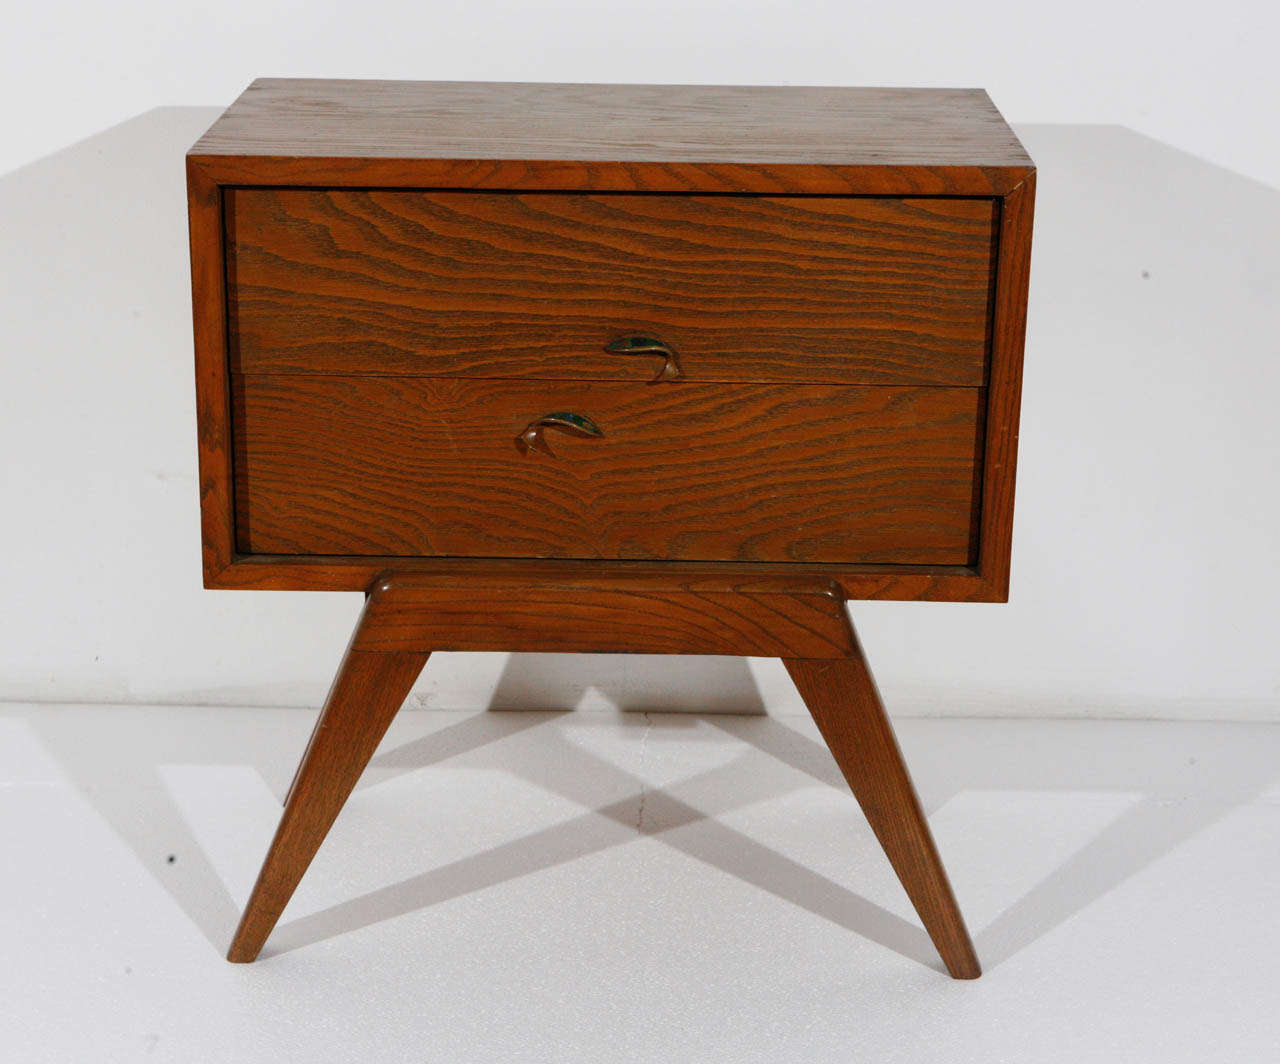 1960s Maximilian Karp side table with graceful fish-shaped handles by Pepe Mendoza.